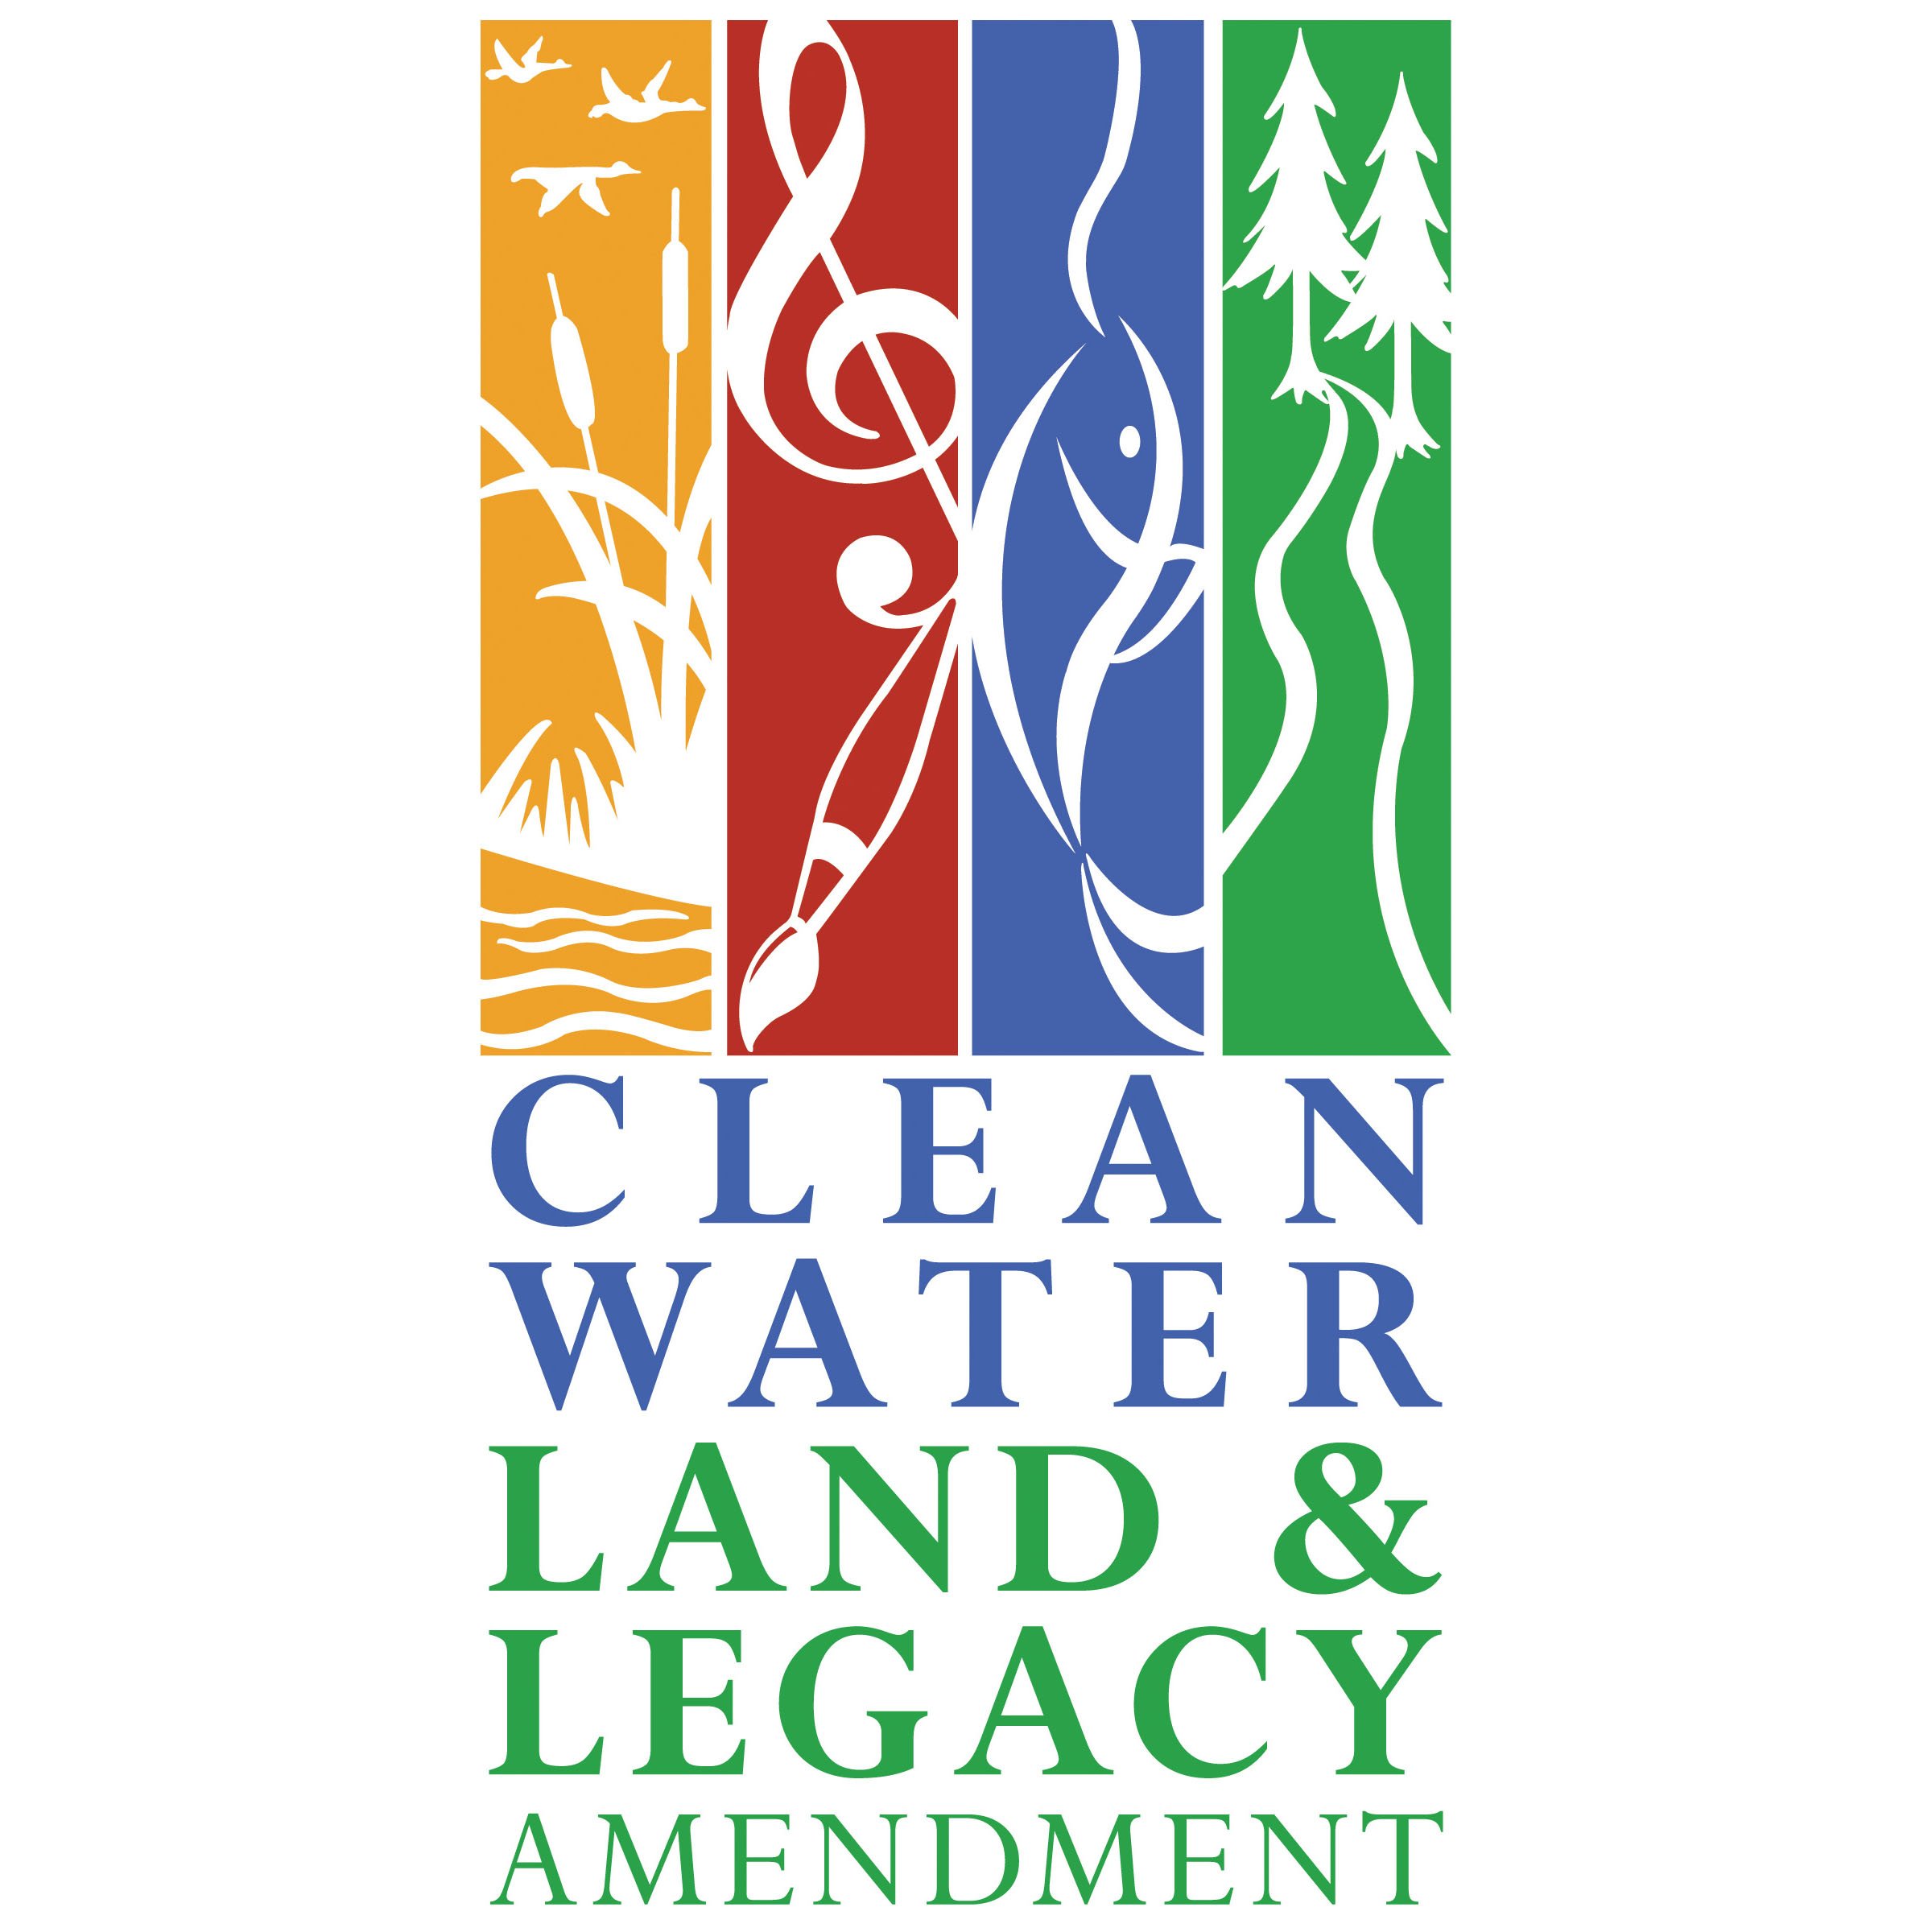 Clean Water, Land & Legacy Amendement